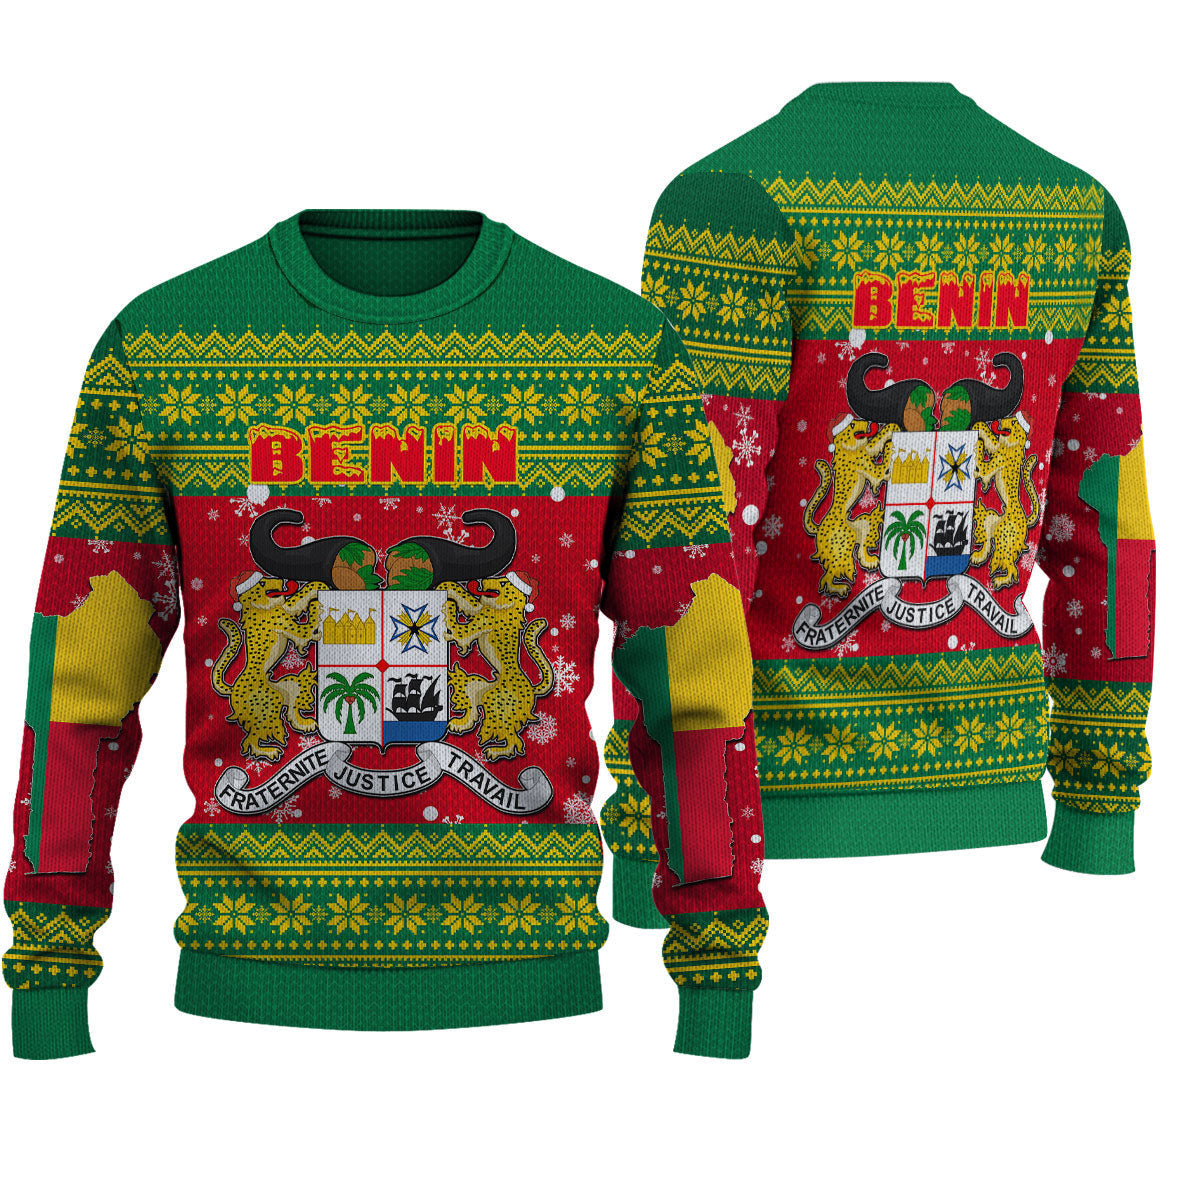 wonder-print-shop-ugly-sweater-benin-christmas-knitted-sweater